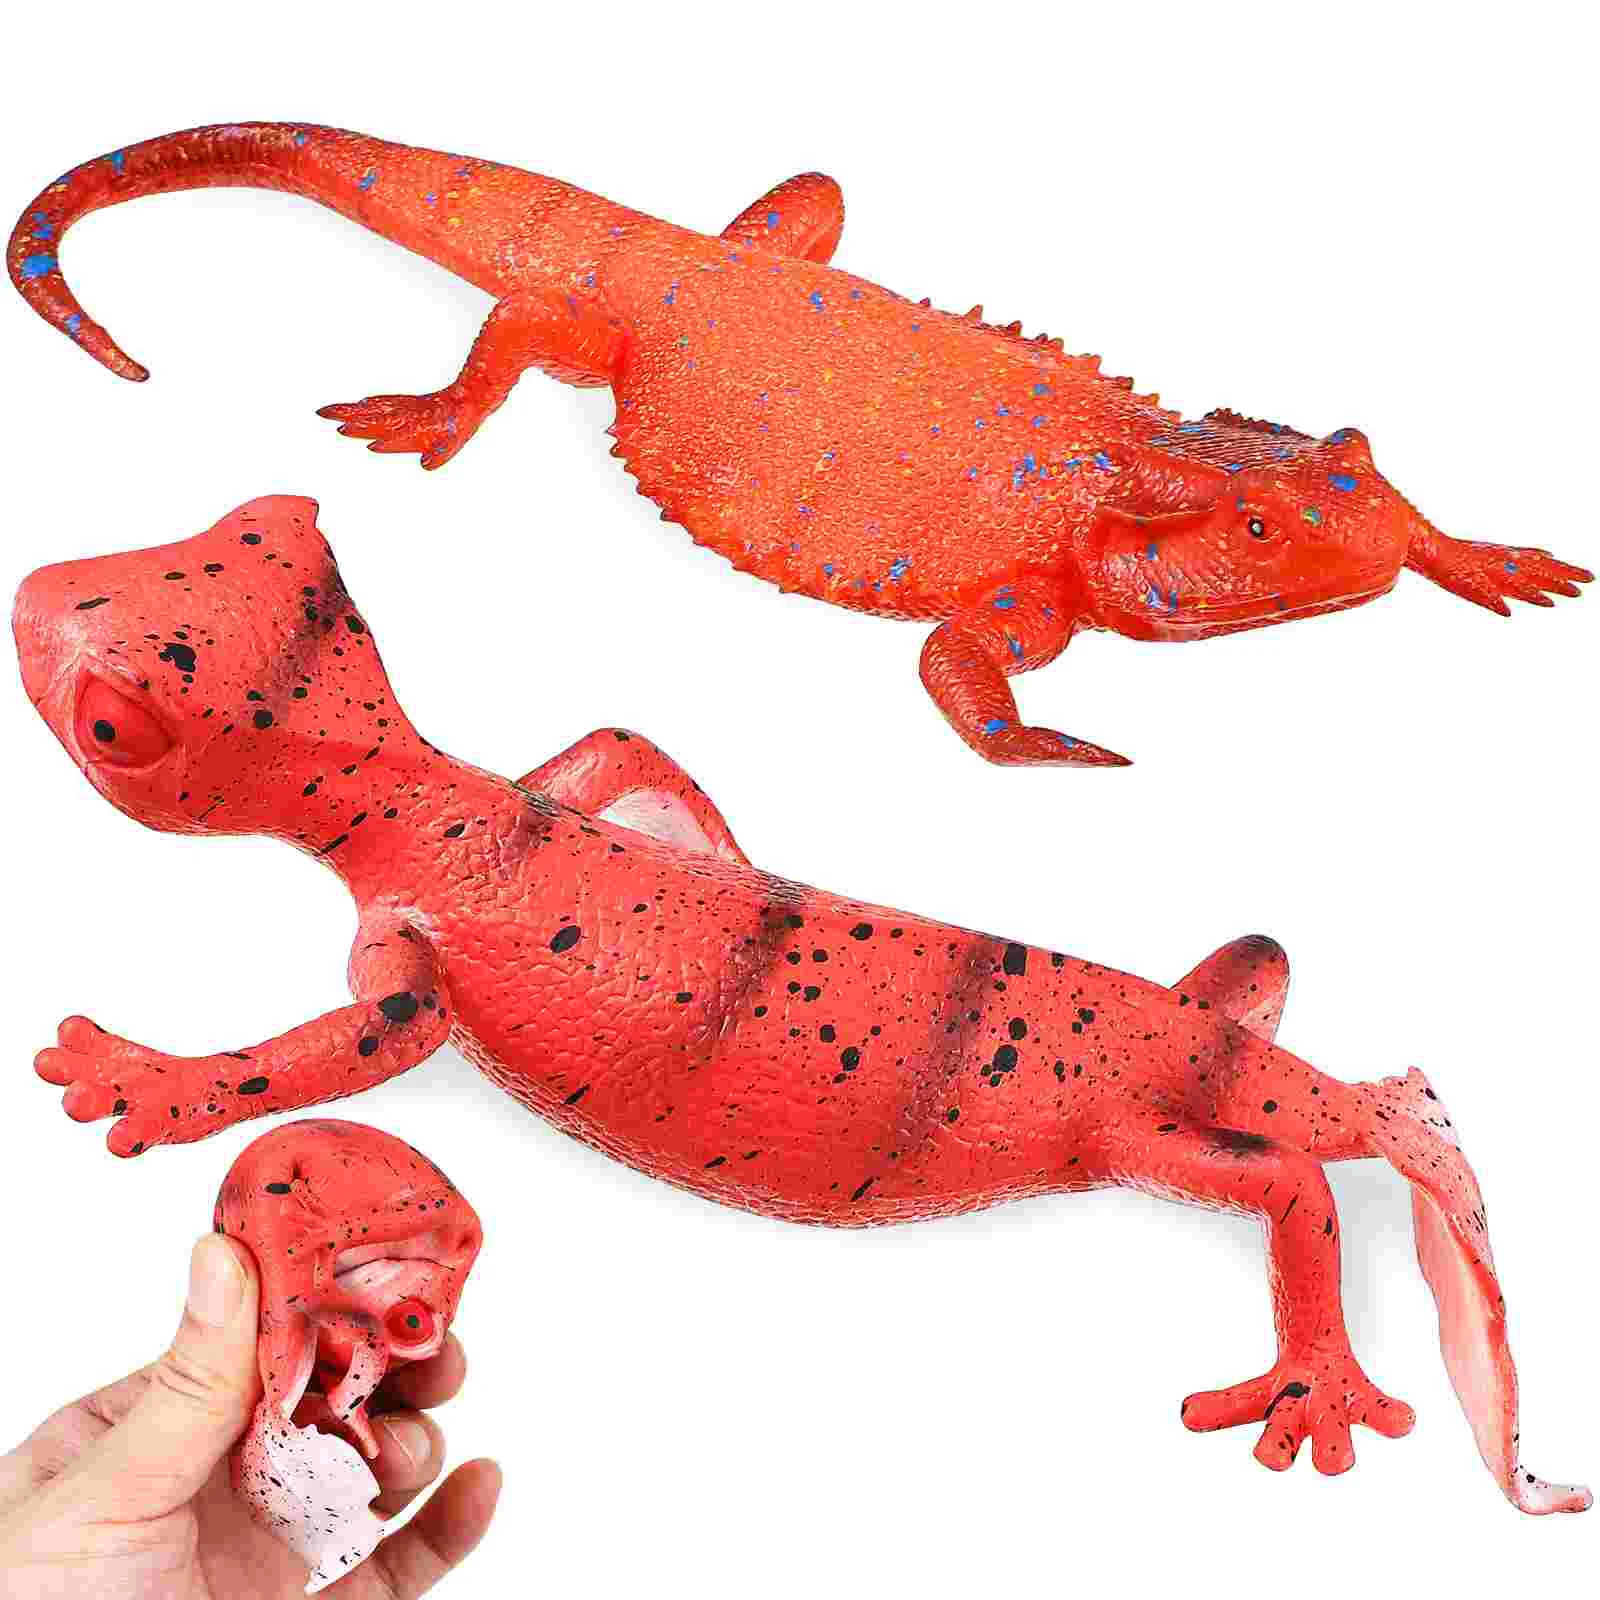 

2 Pcs Crawling Toys Lizard Playthings Animals Statues Adornments Centipede Figurines Model Props Kids Child